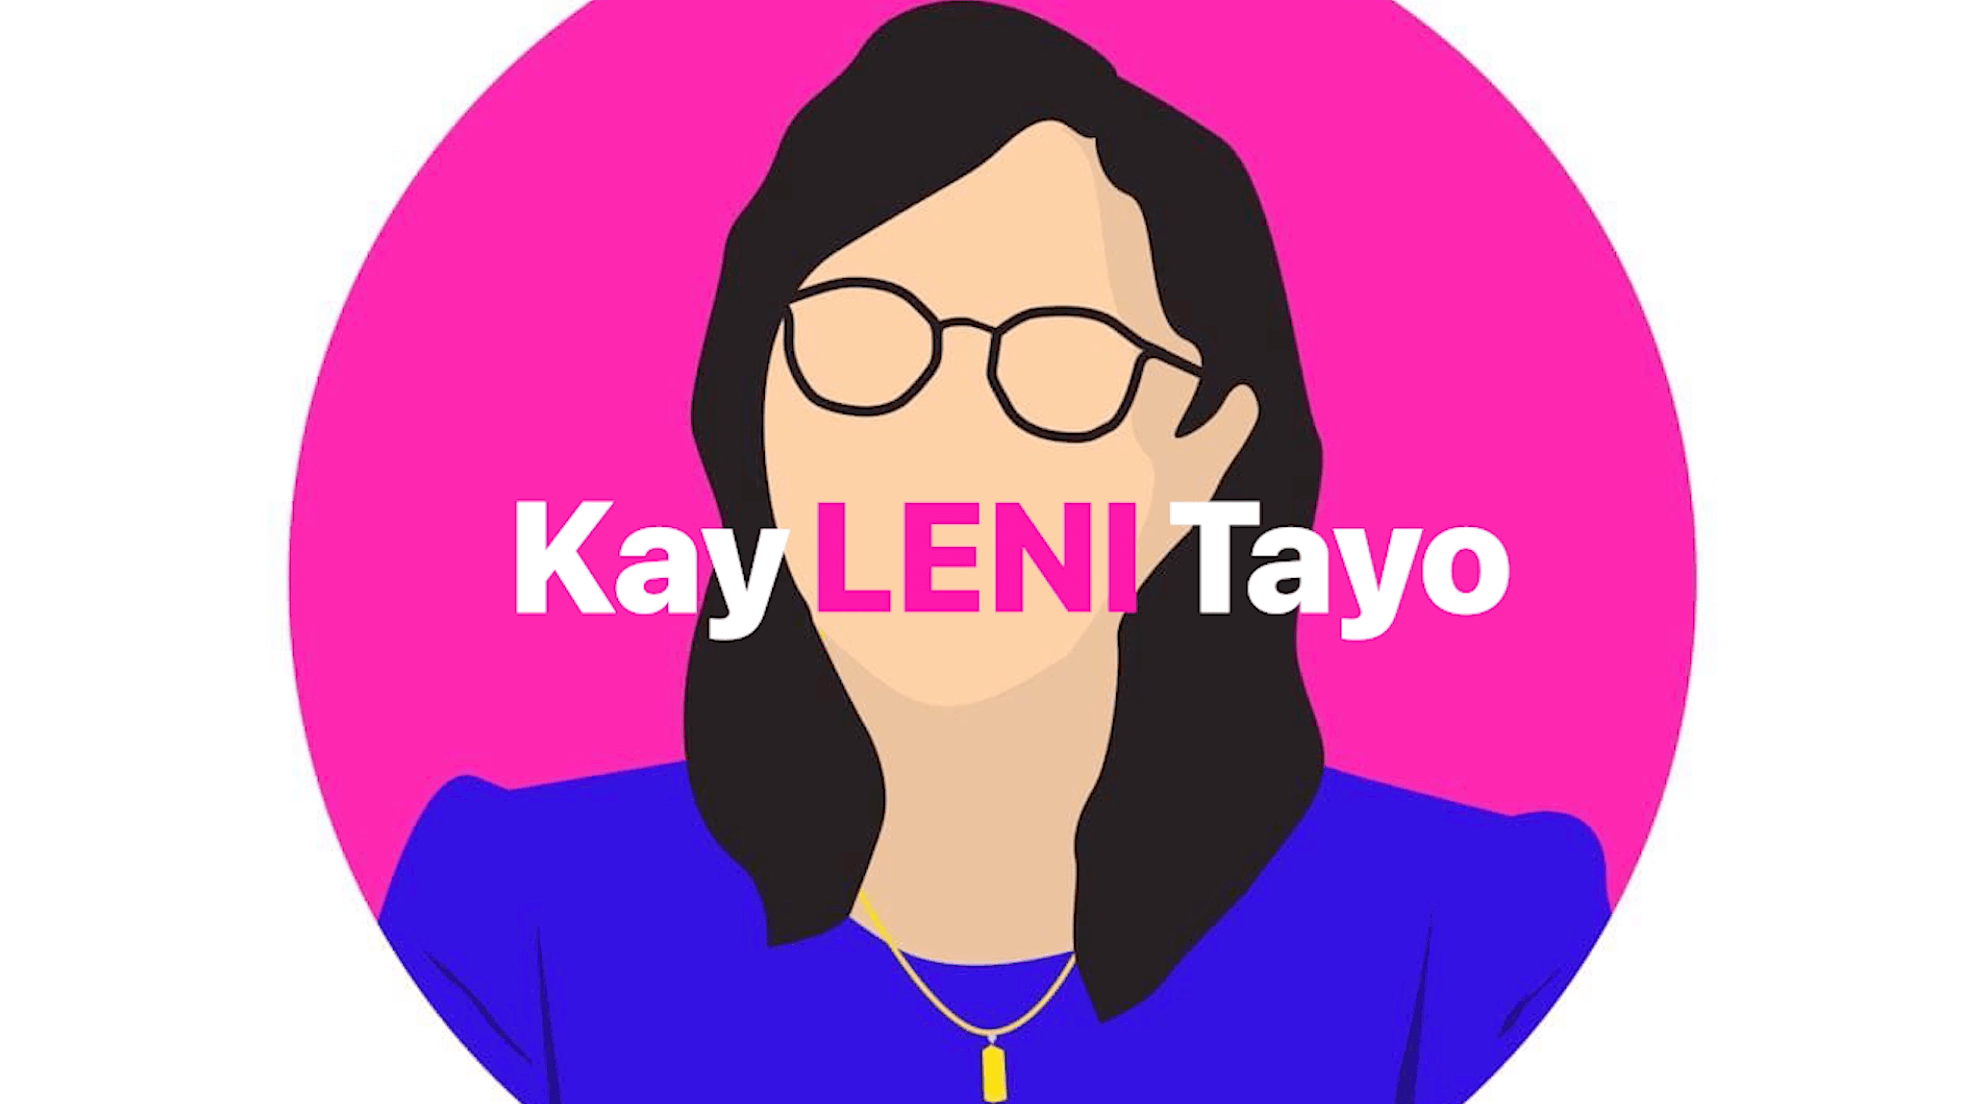 Music in PH politics: Why and how the ‘Kay Leni Tayo’ jingle was made for free